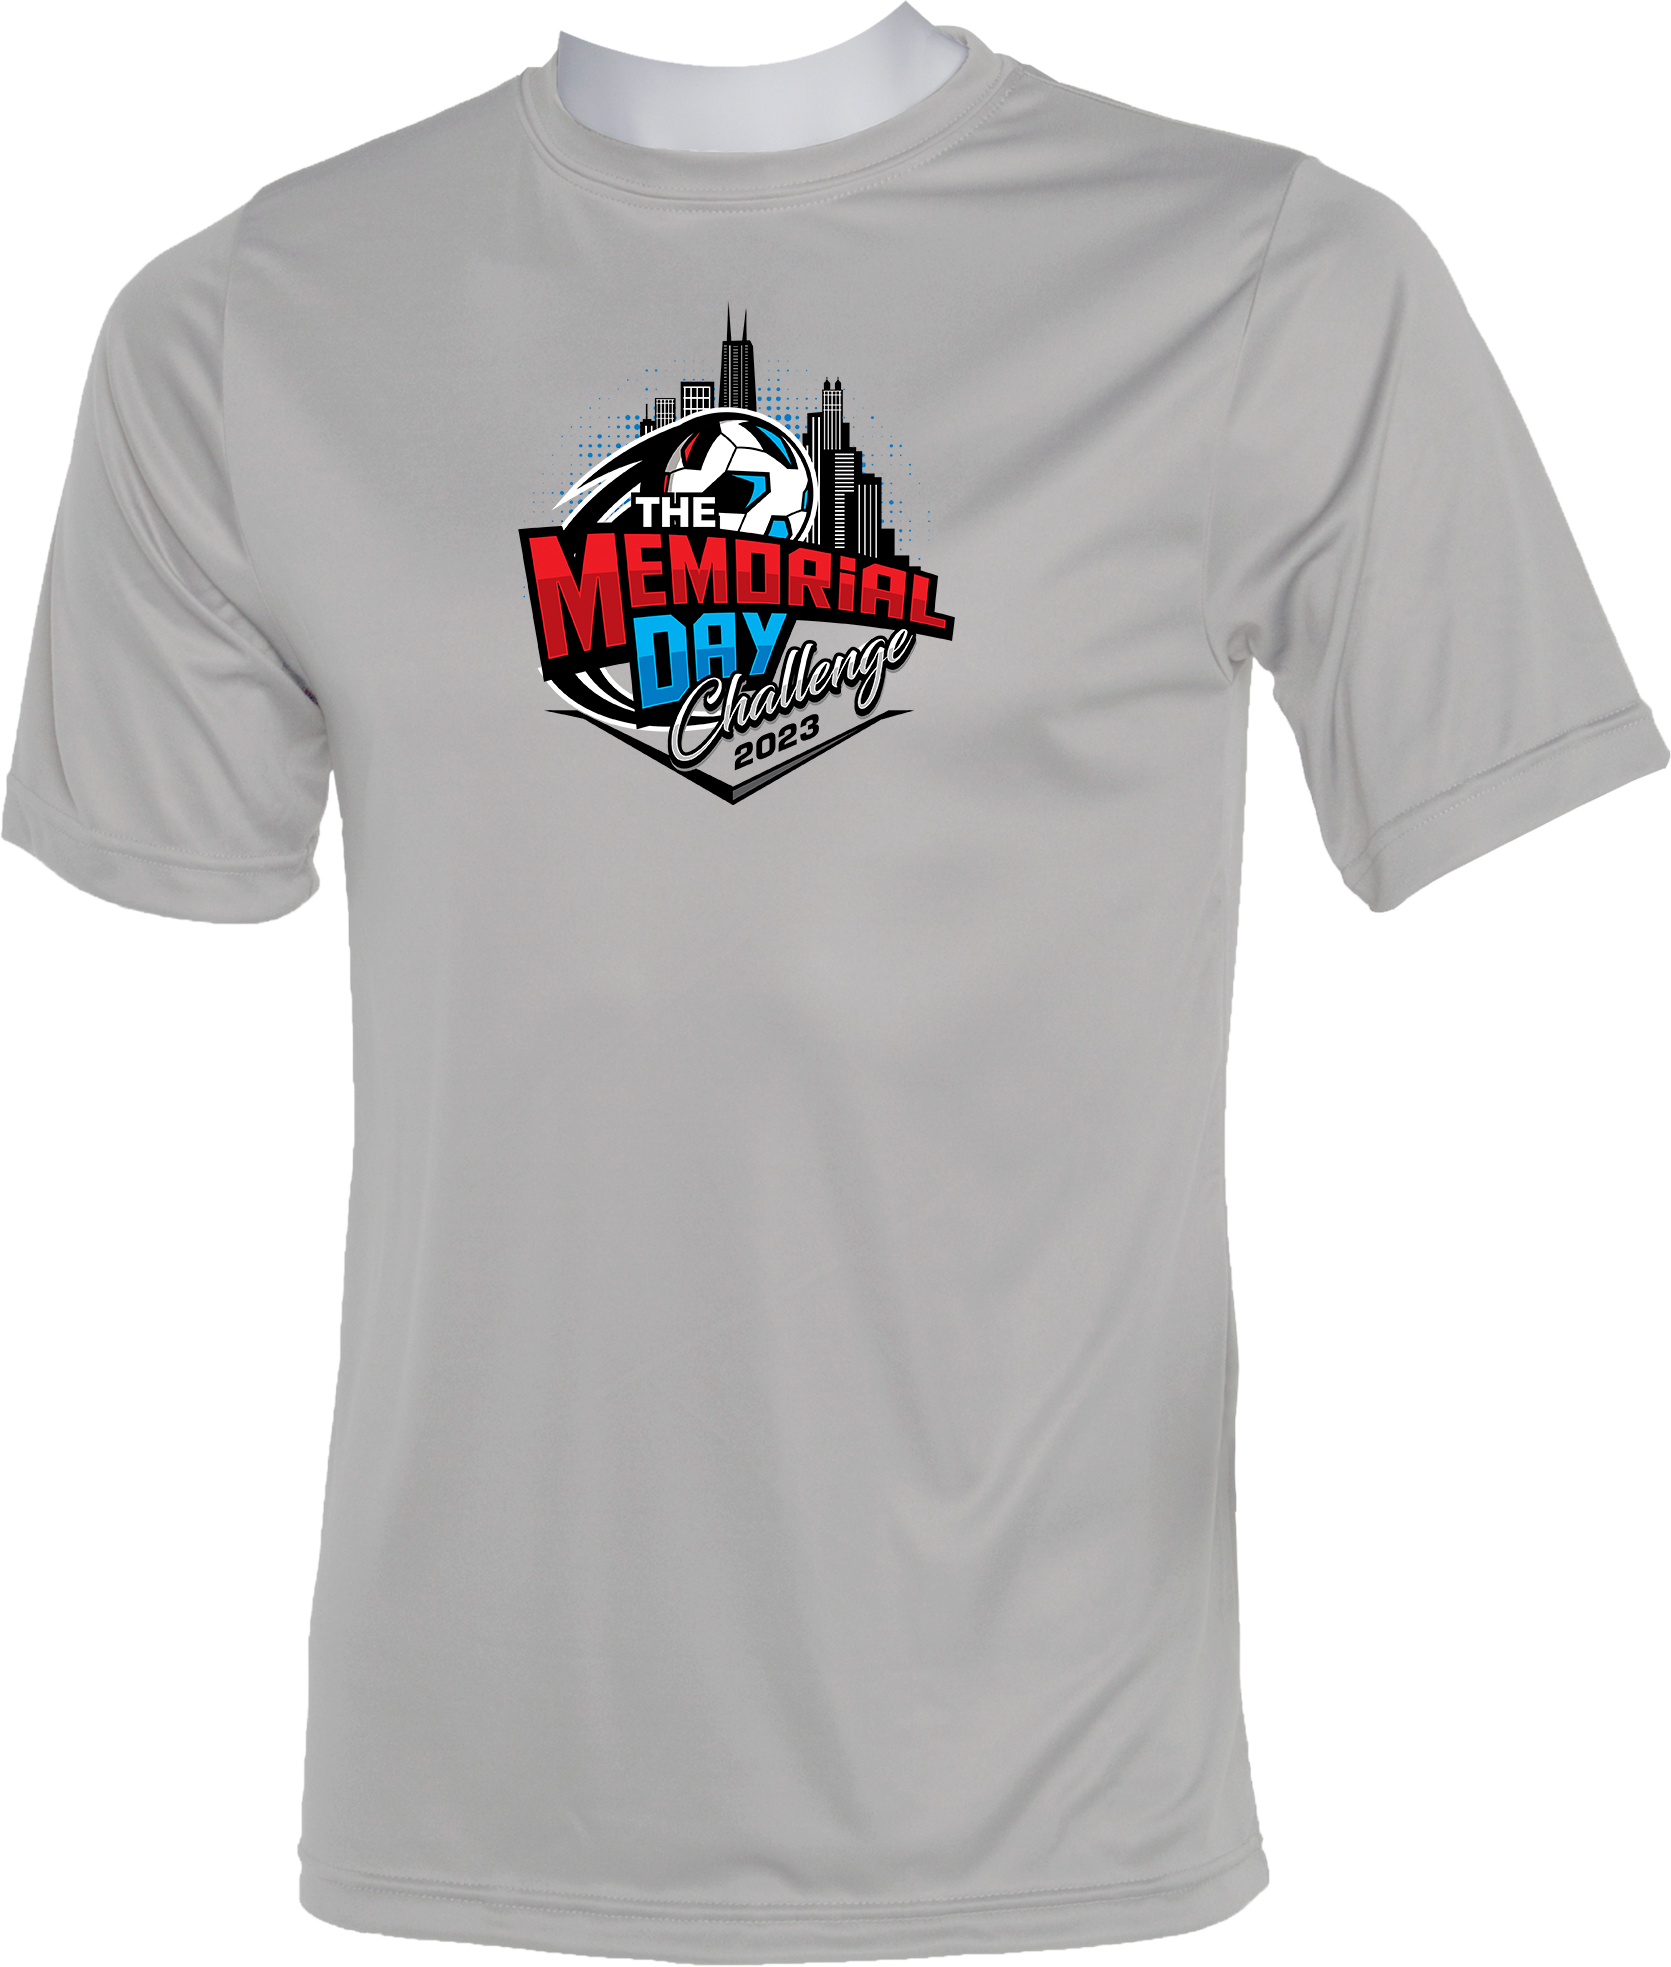 PERFORMANCE SHIRTS - 2023 The Memorial Day Challenge